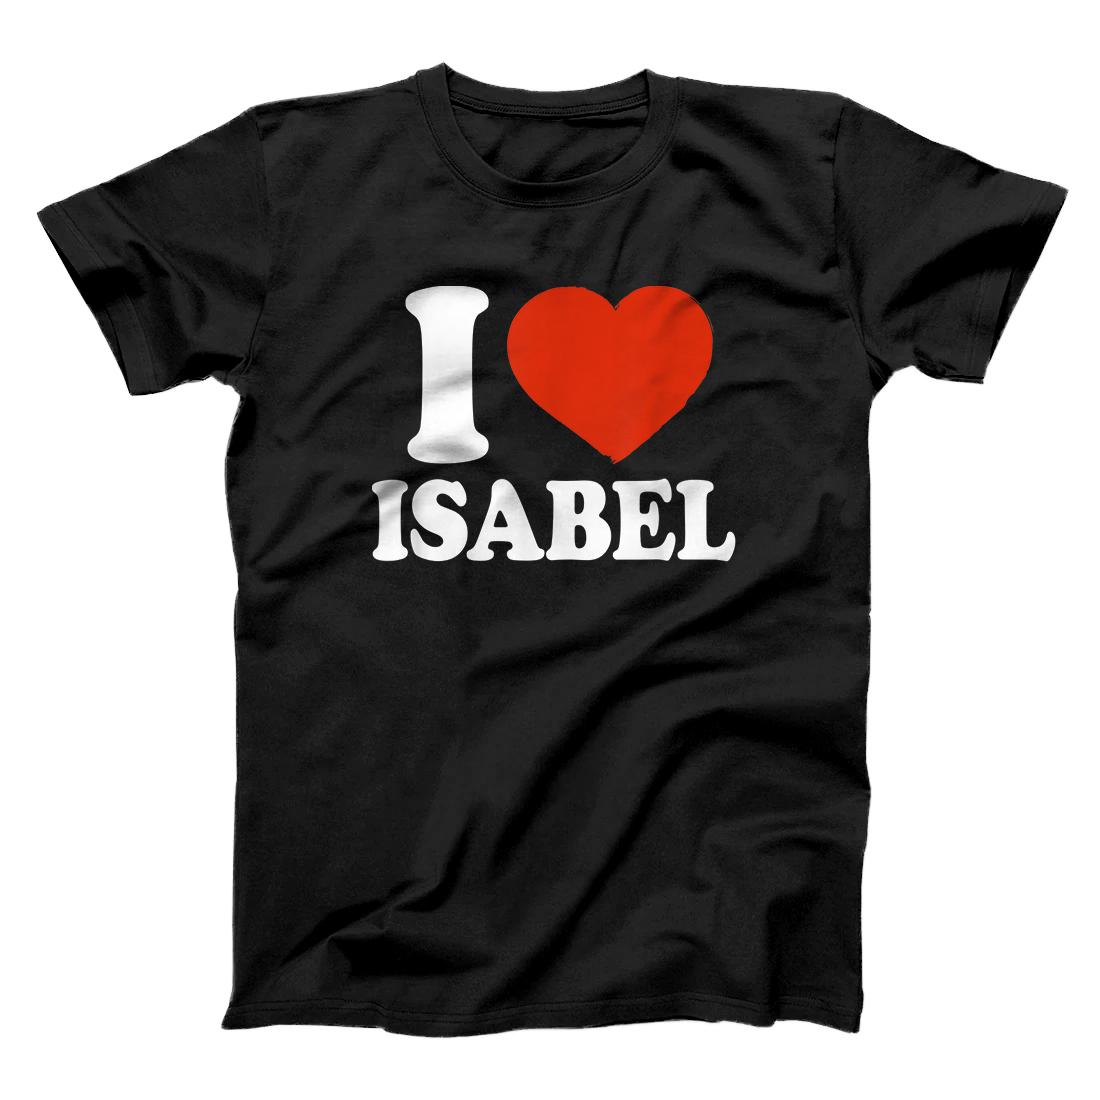 Personalized I Love Isabel, I Heart Isabel, Red Heart Valentine T-Shirt